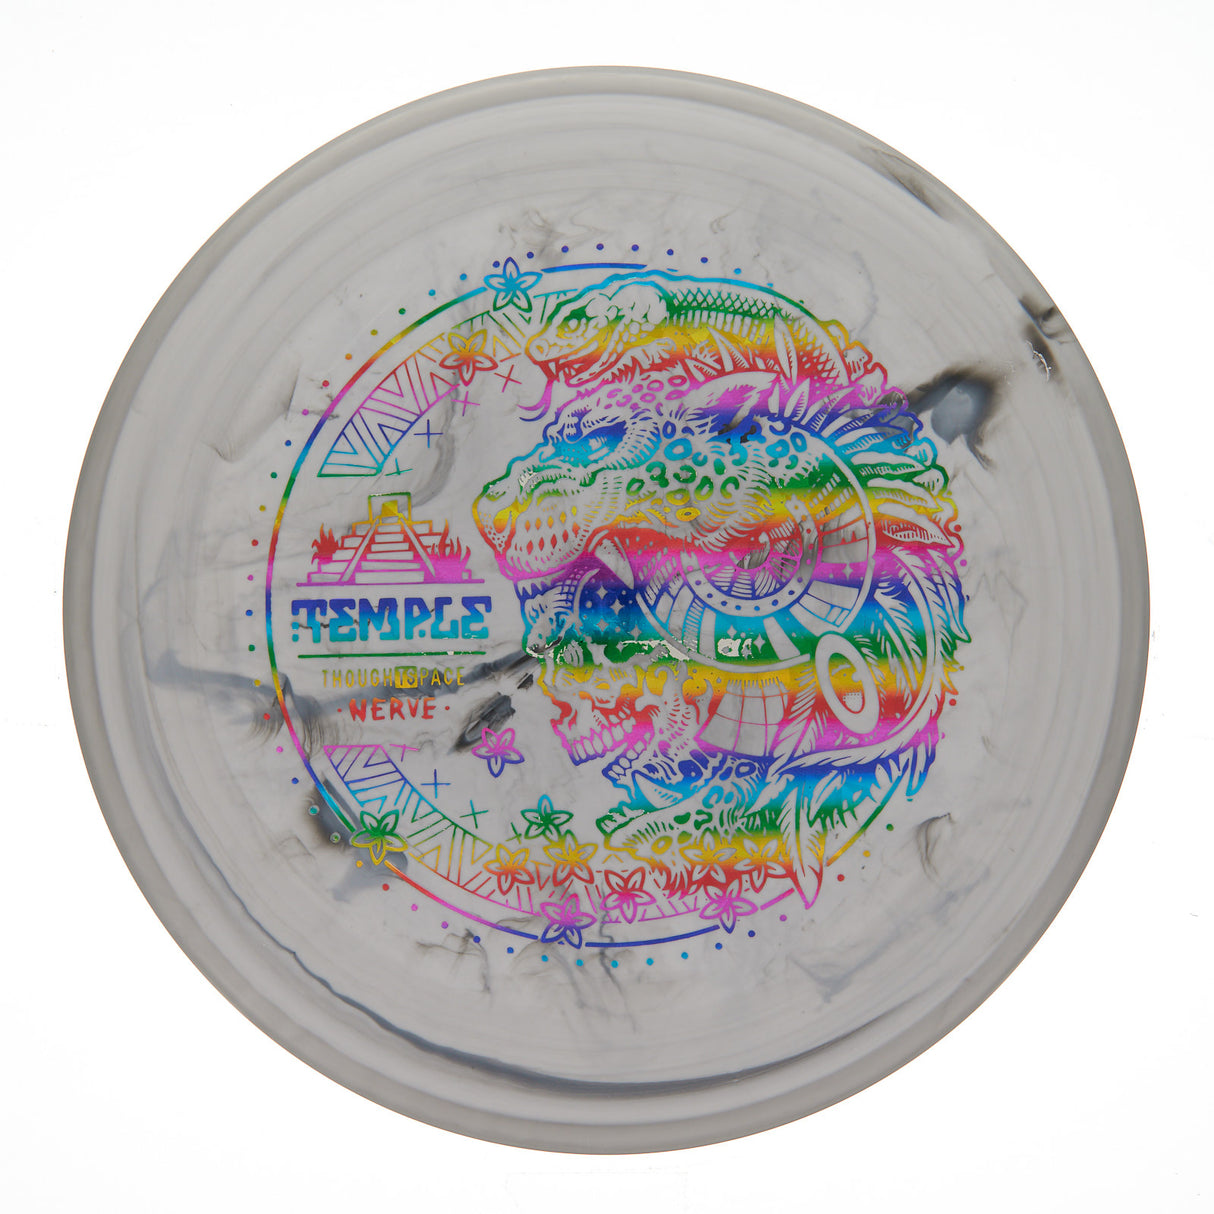 Thought Space Athletics Temple - Test Blend Nerve 174g | Style 0009